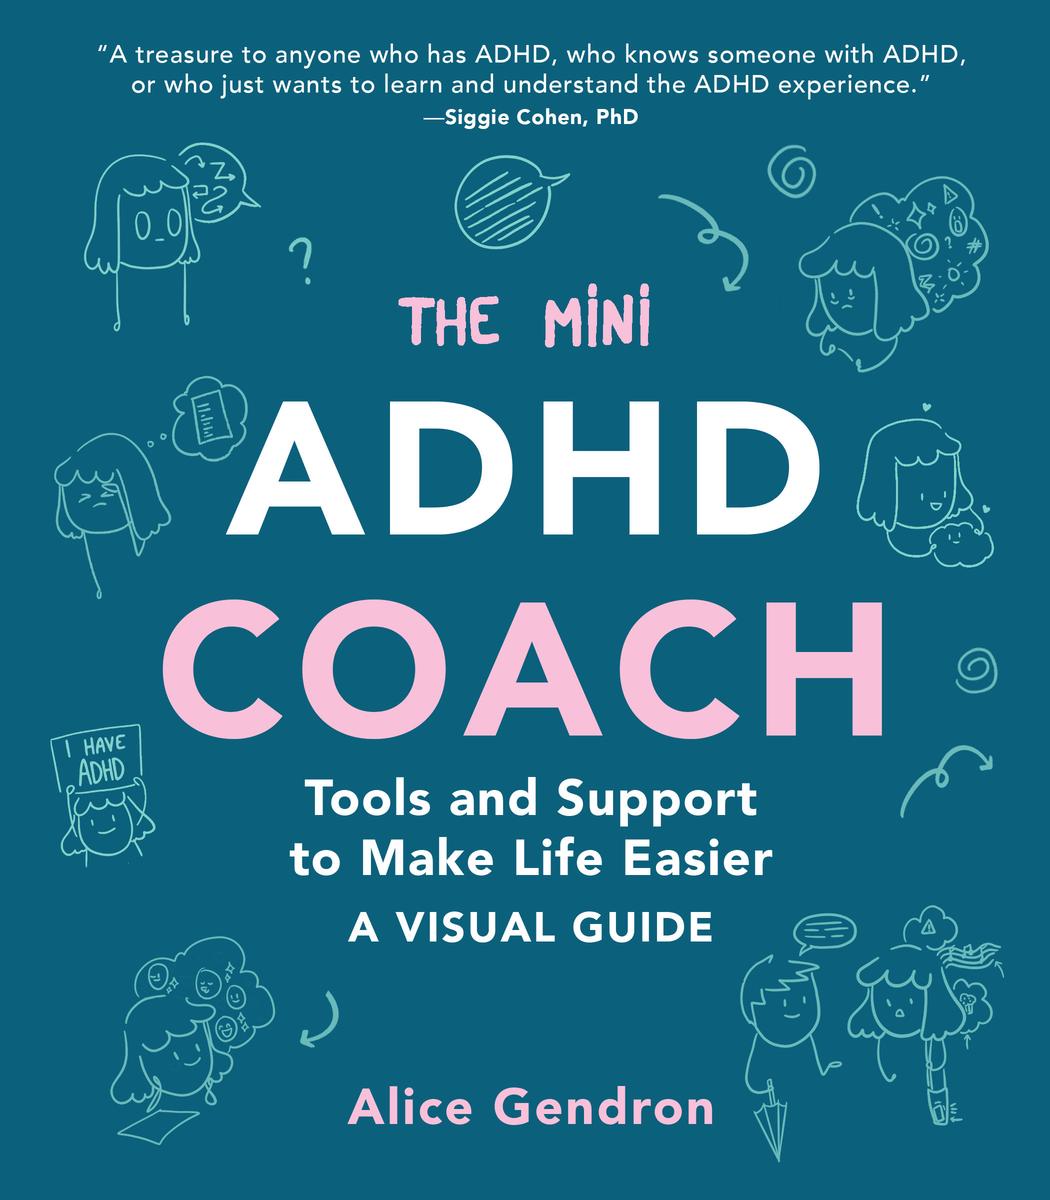 The Mini ADHD Coach - Tools and Support to Make Life Easier - A Visual Guide